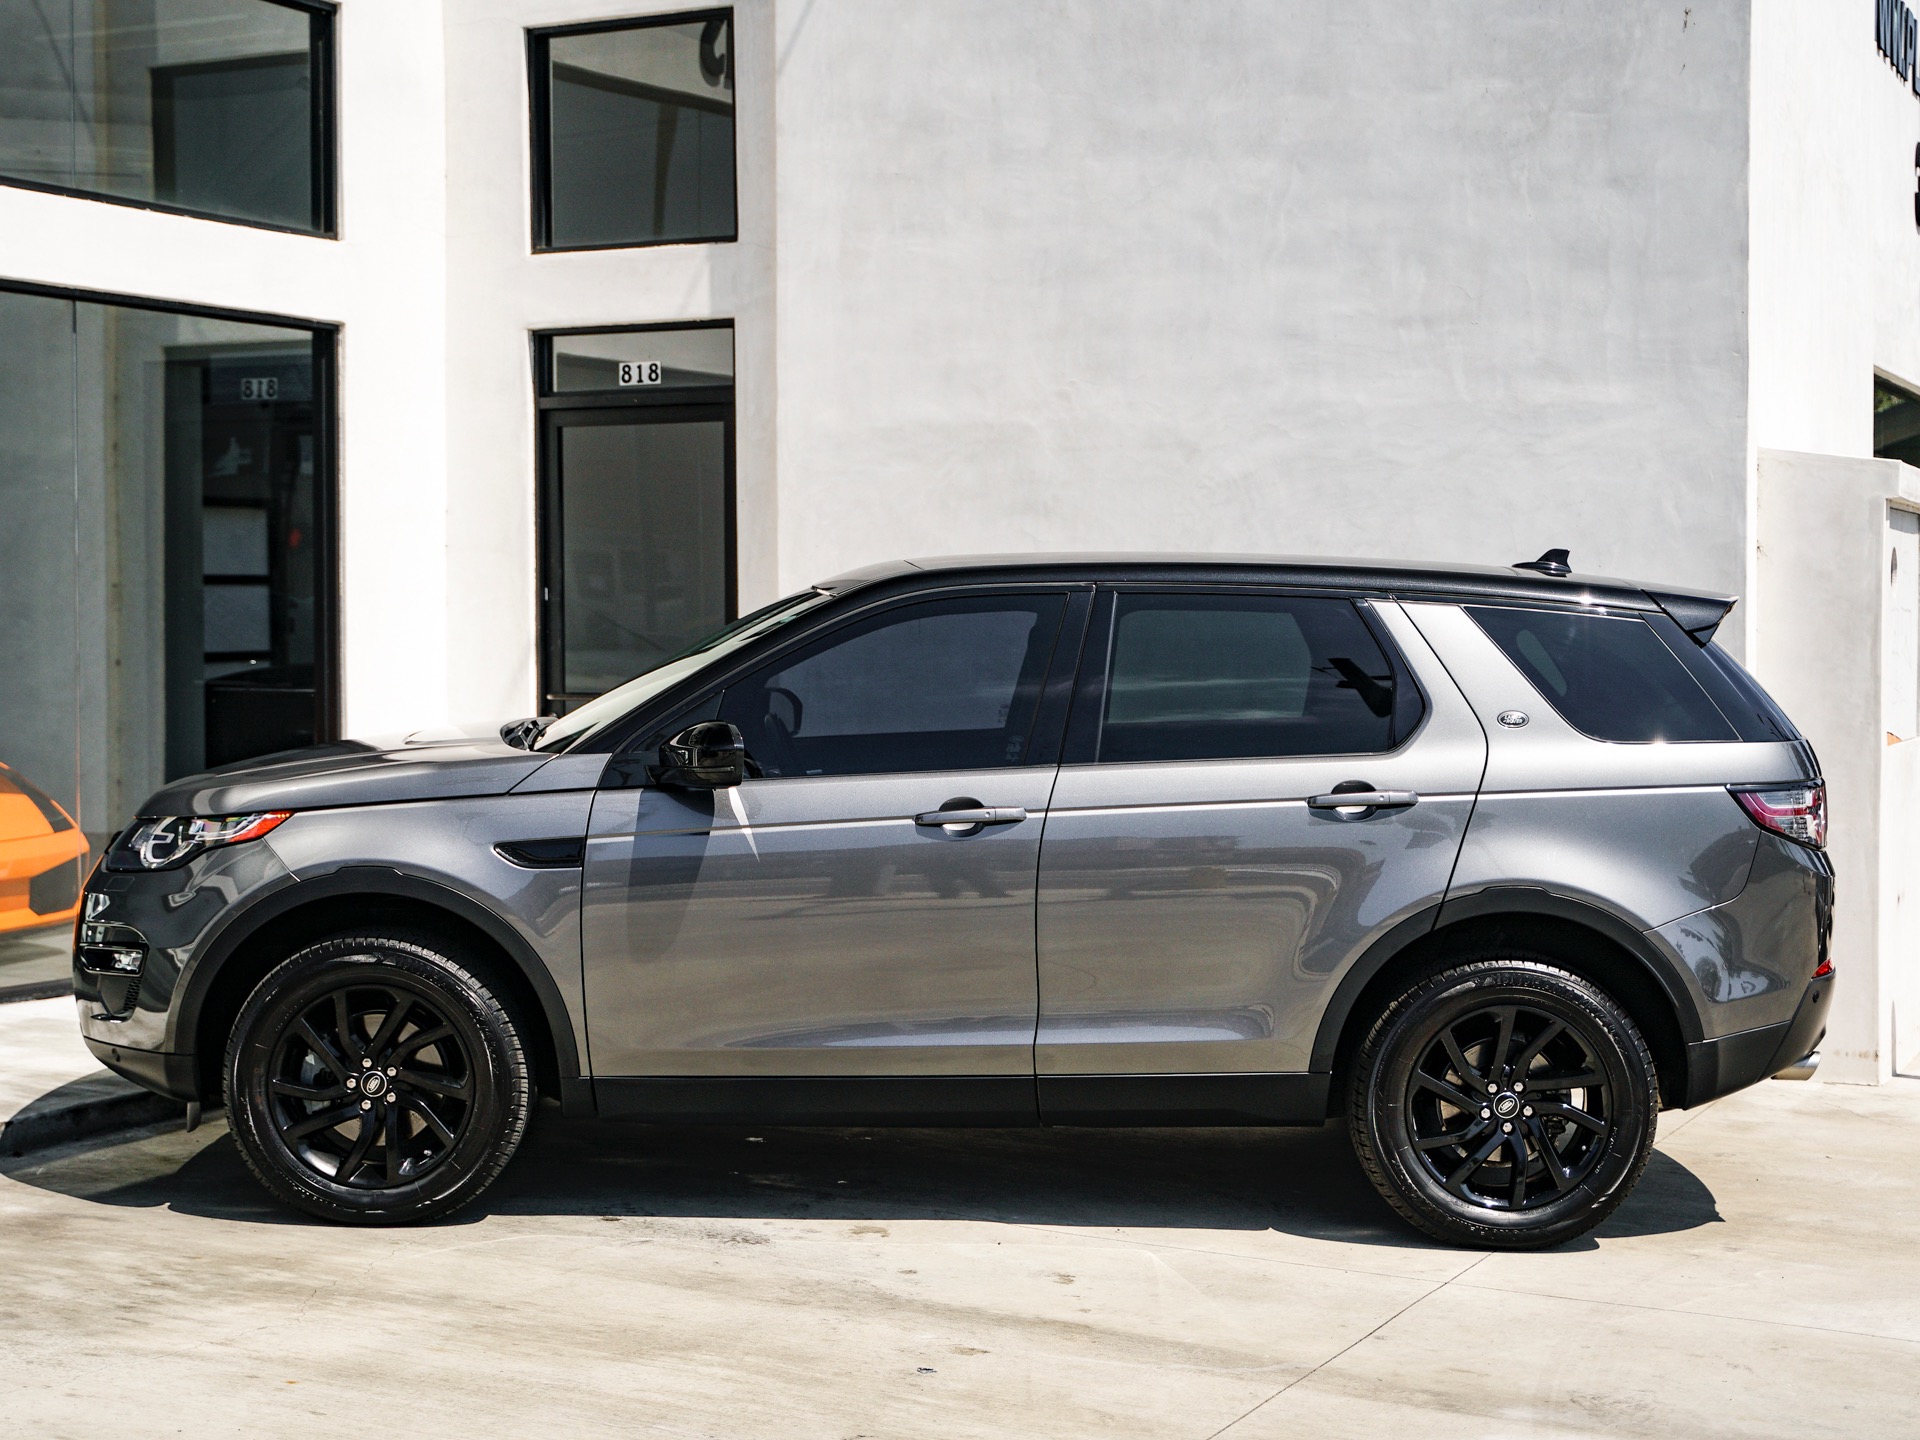 2016 Land Discovery Sport HSE Stock # 6898 for sale near Redondo Beach, CA | CA Land Rover Dealer